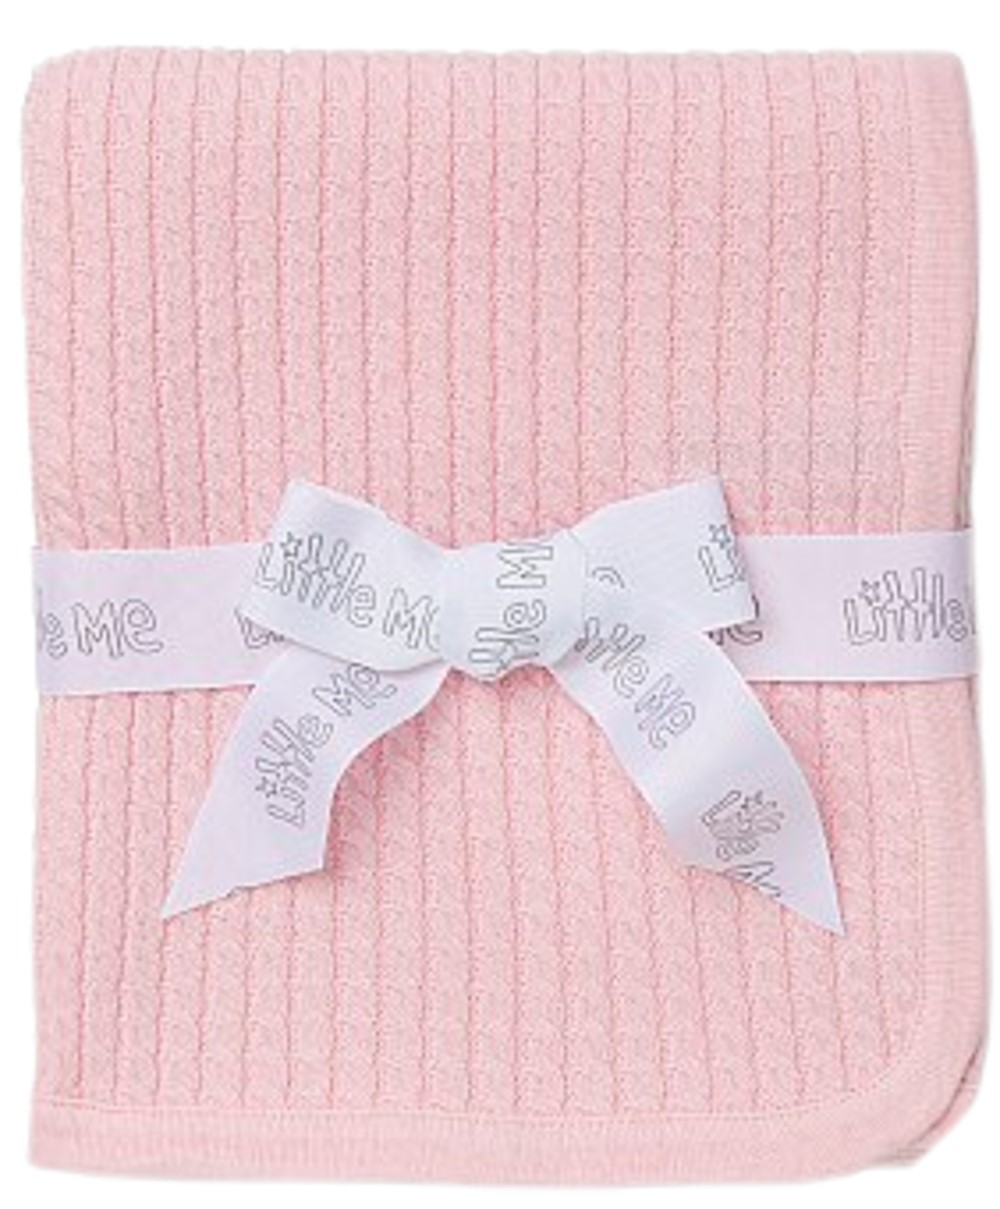 LITTLE ME L677 BABY GIRLS PINK CABLE KNIT BLANKET